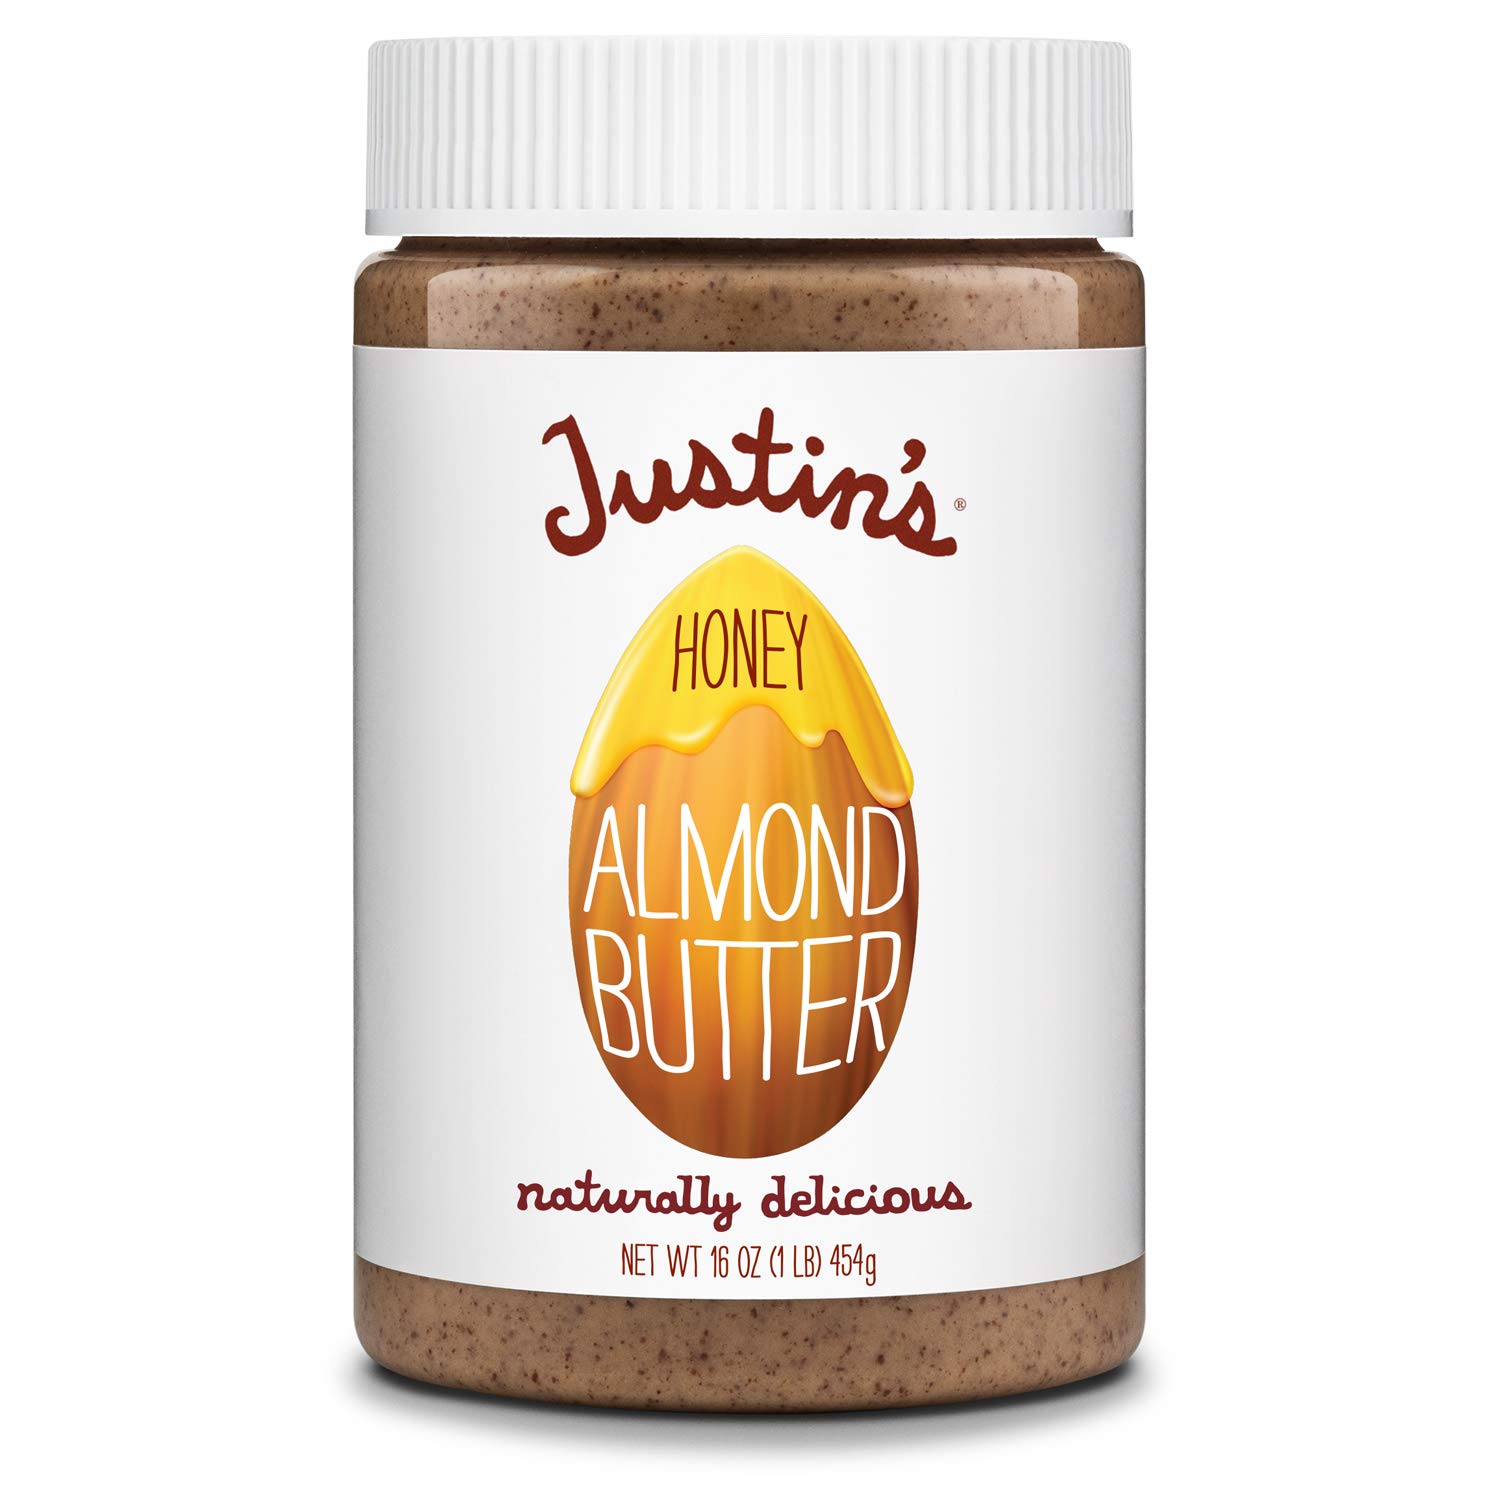 16-Oz Justin's No Stir Honey Almond Butter $4.78 w/ S&S + Free Shipping w/ Prime or on orders over $35